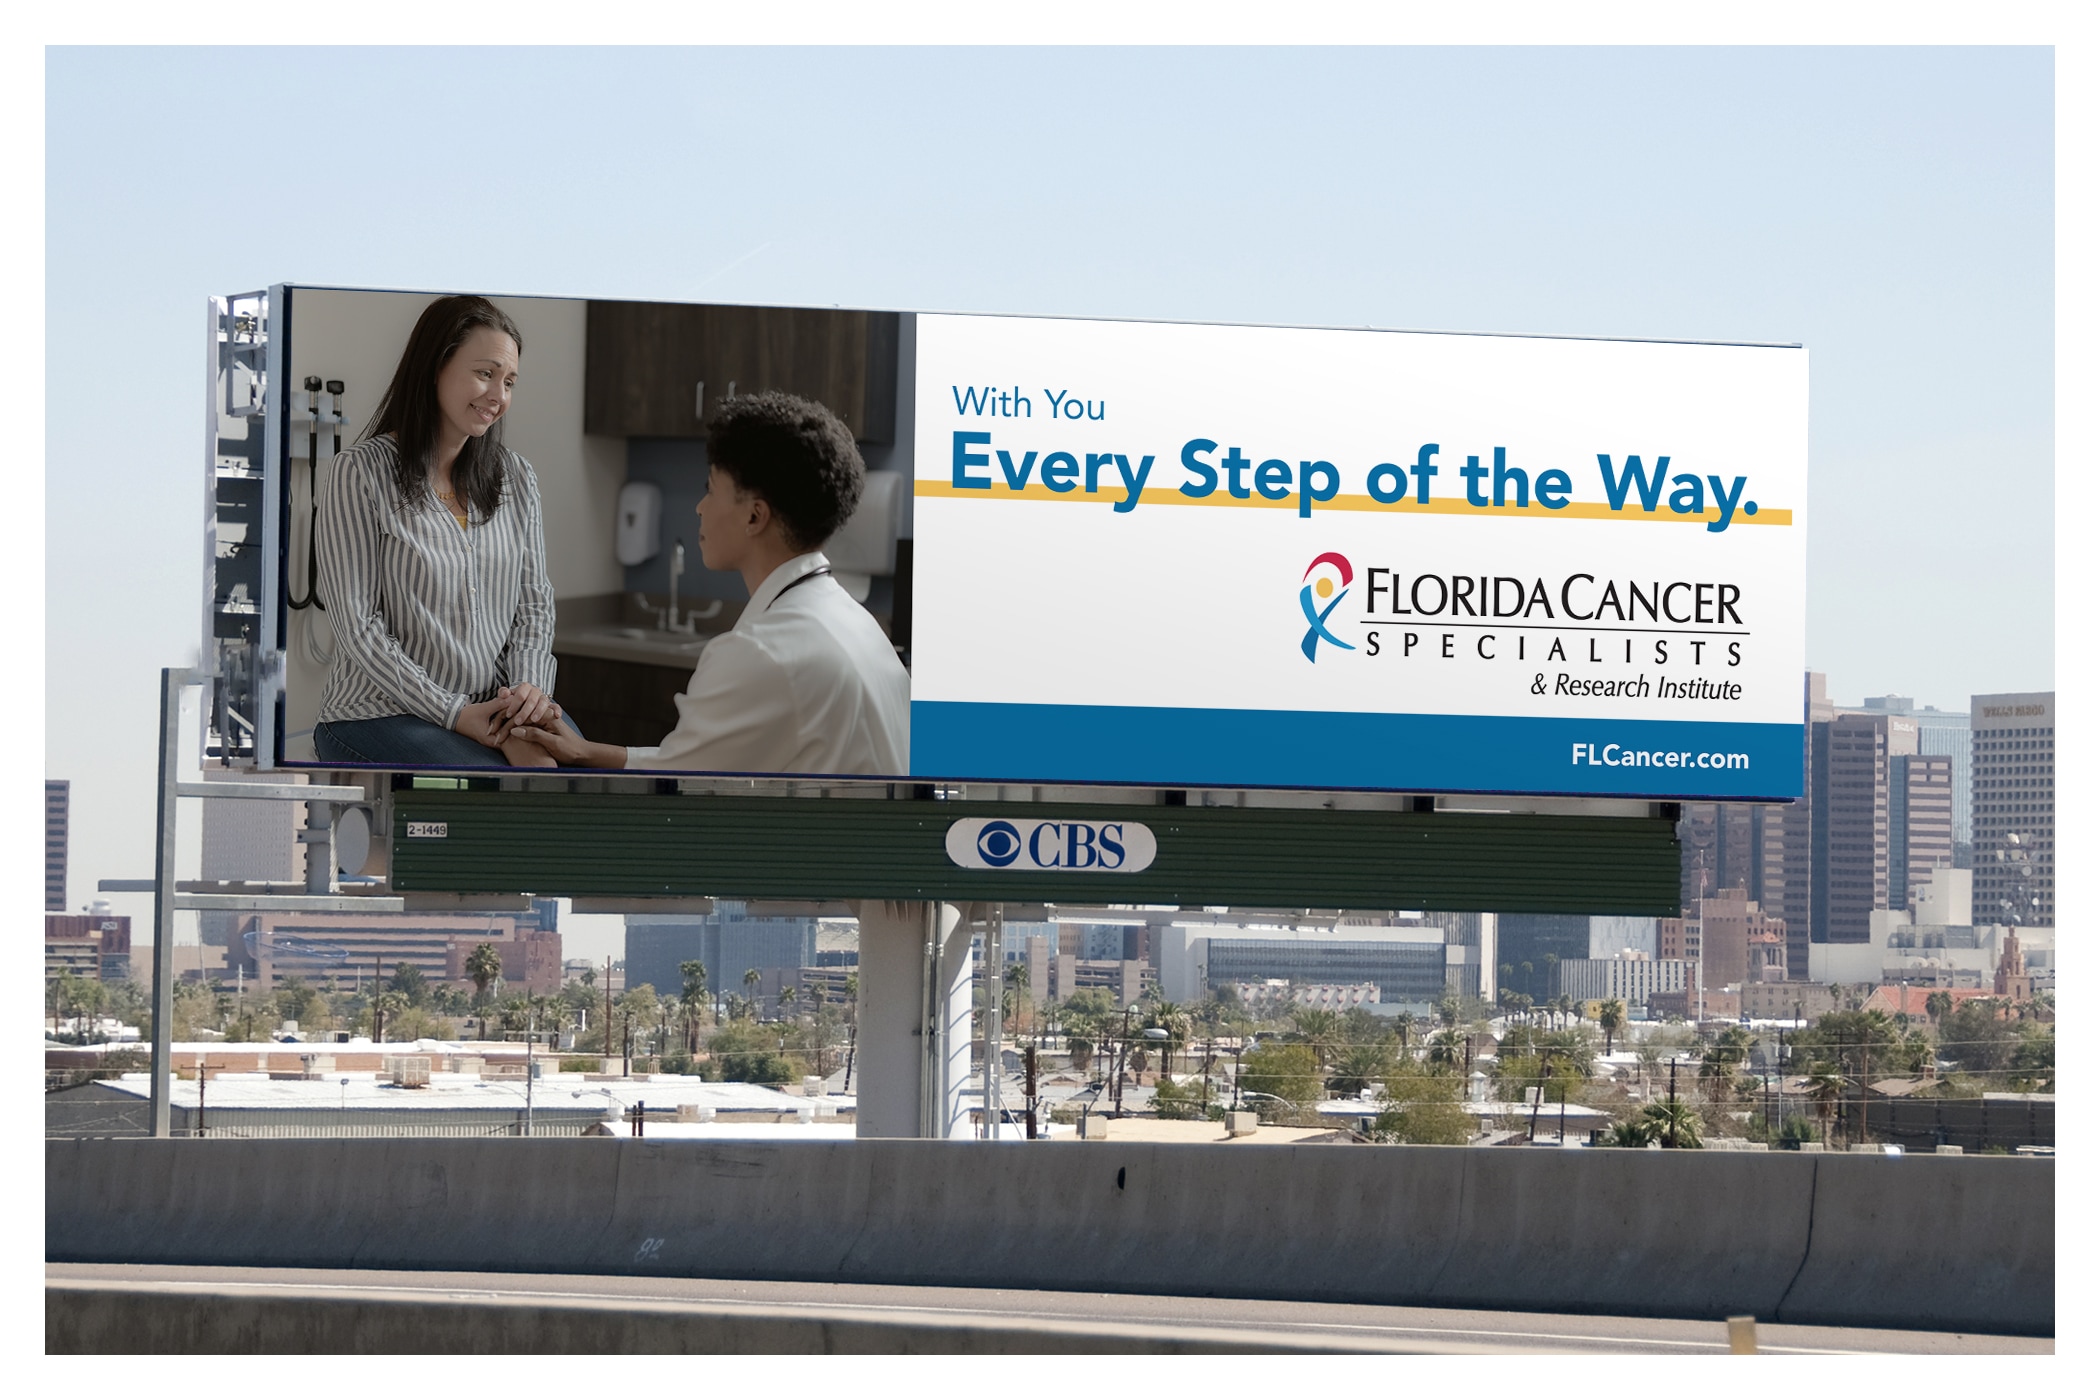 Photo of Every Step of the Way Billboard for Florida Cancer Specialists